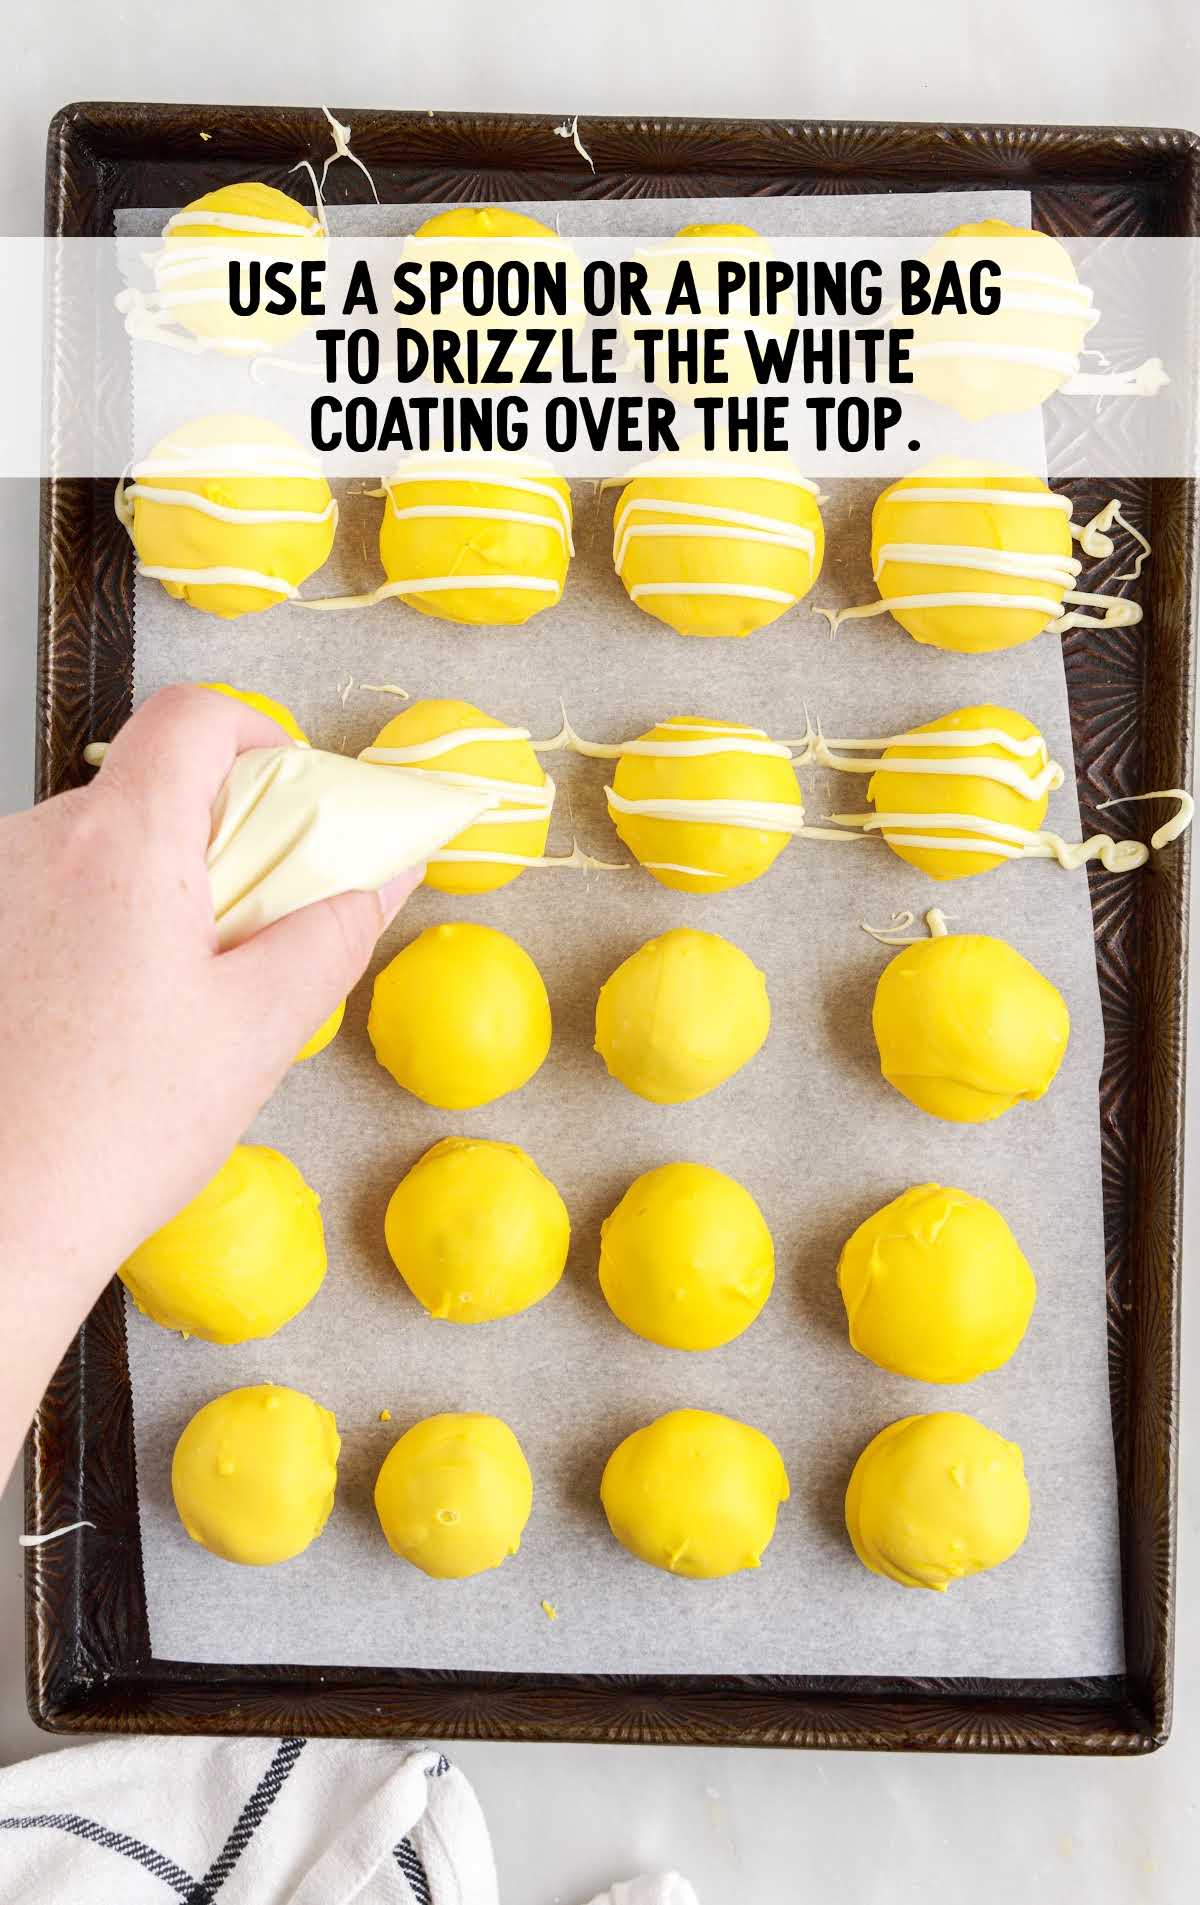 white coating drizzled on top of the bites in a baking sheet